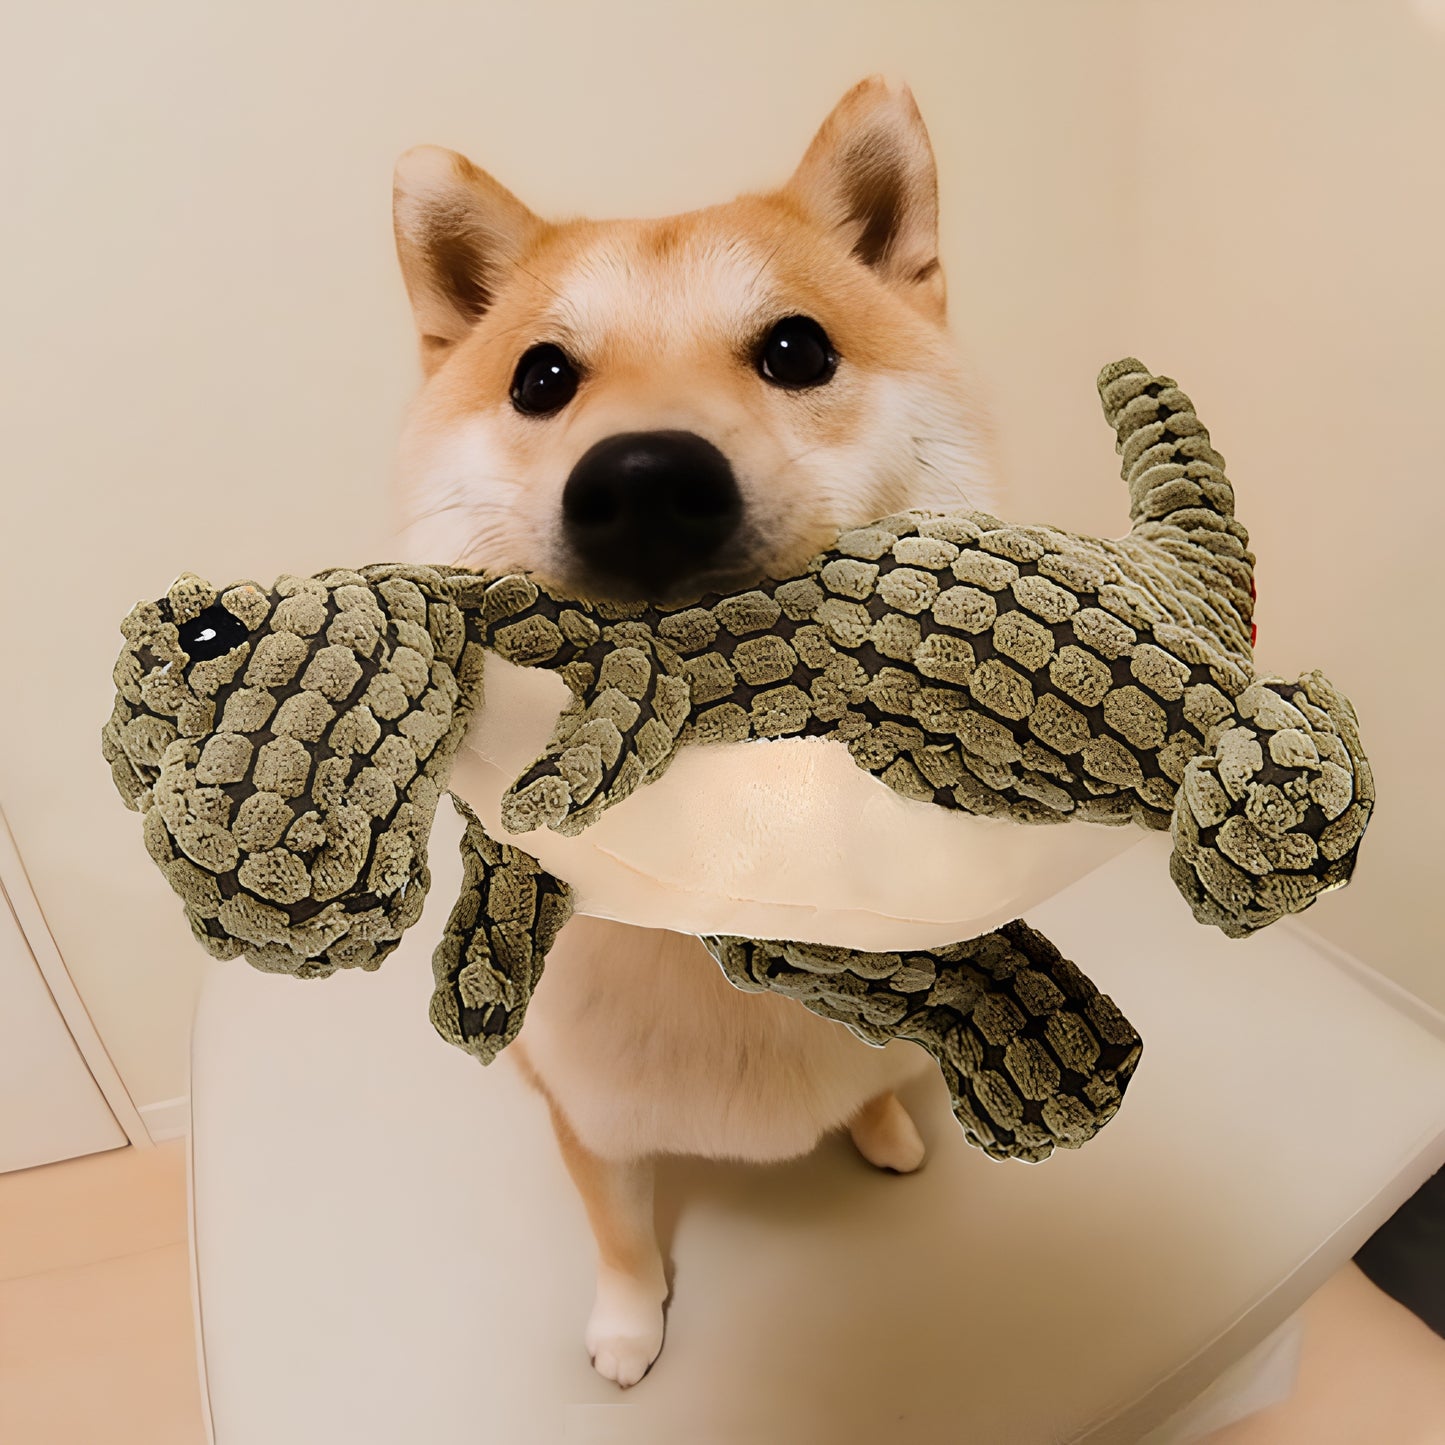 Dinobite - The plush toy for your dog